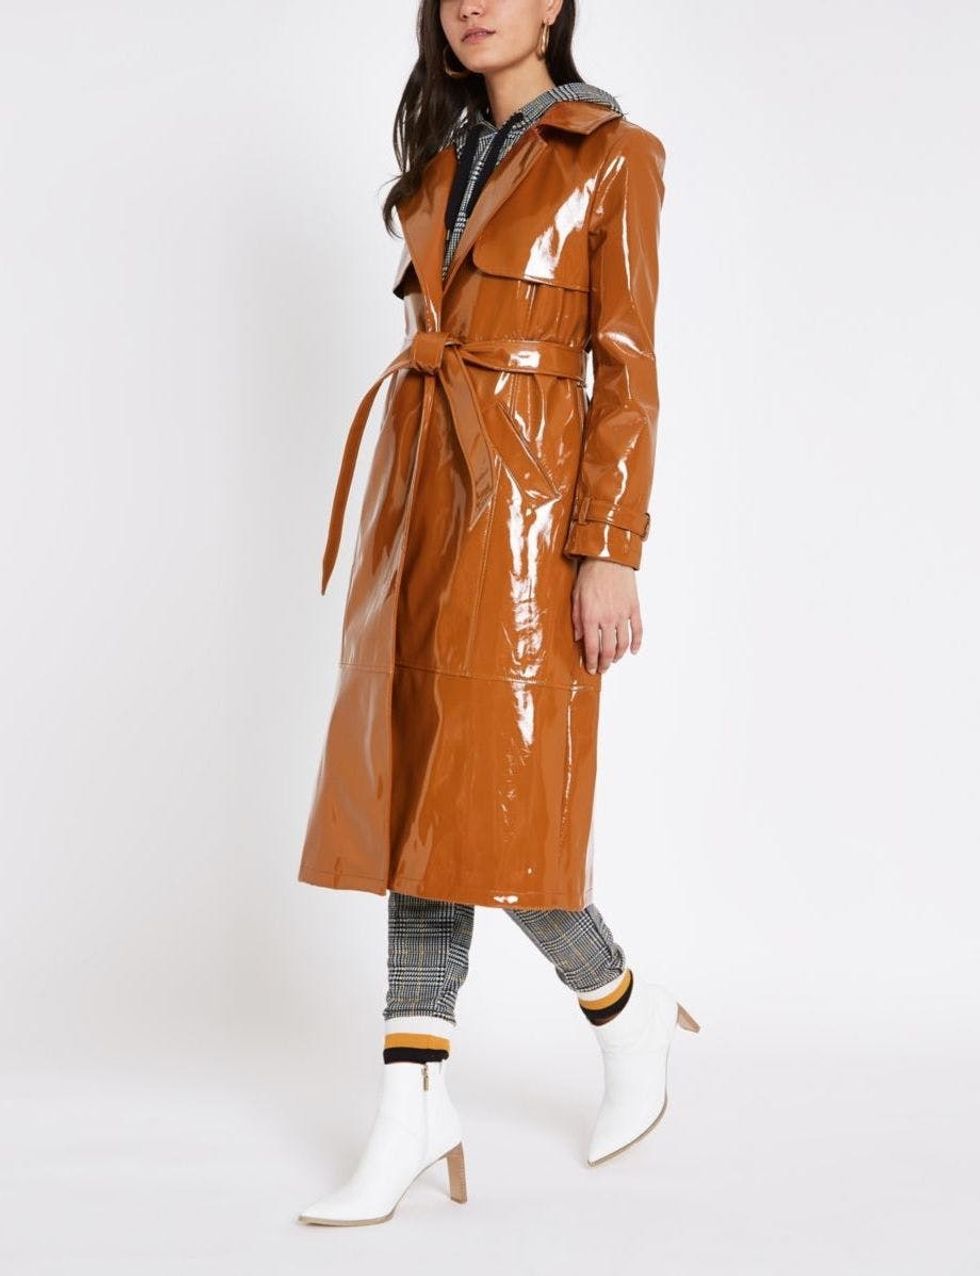 10 Stylish Raincoats That Will Have You Excited for Gloomy Weather ...